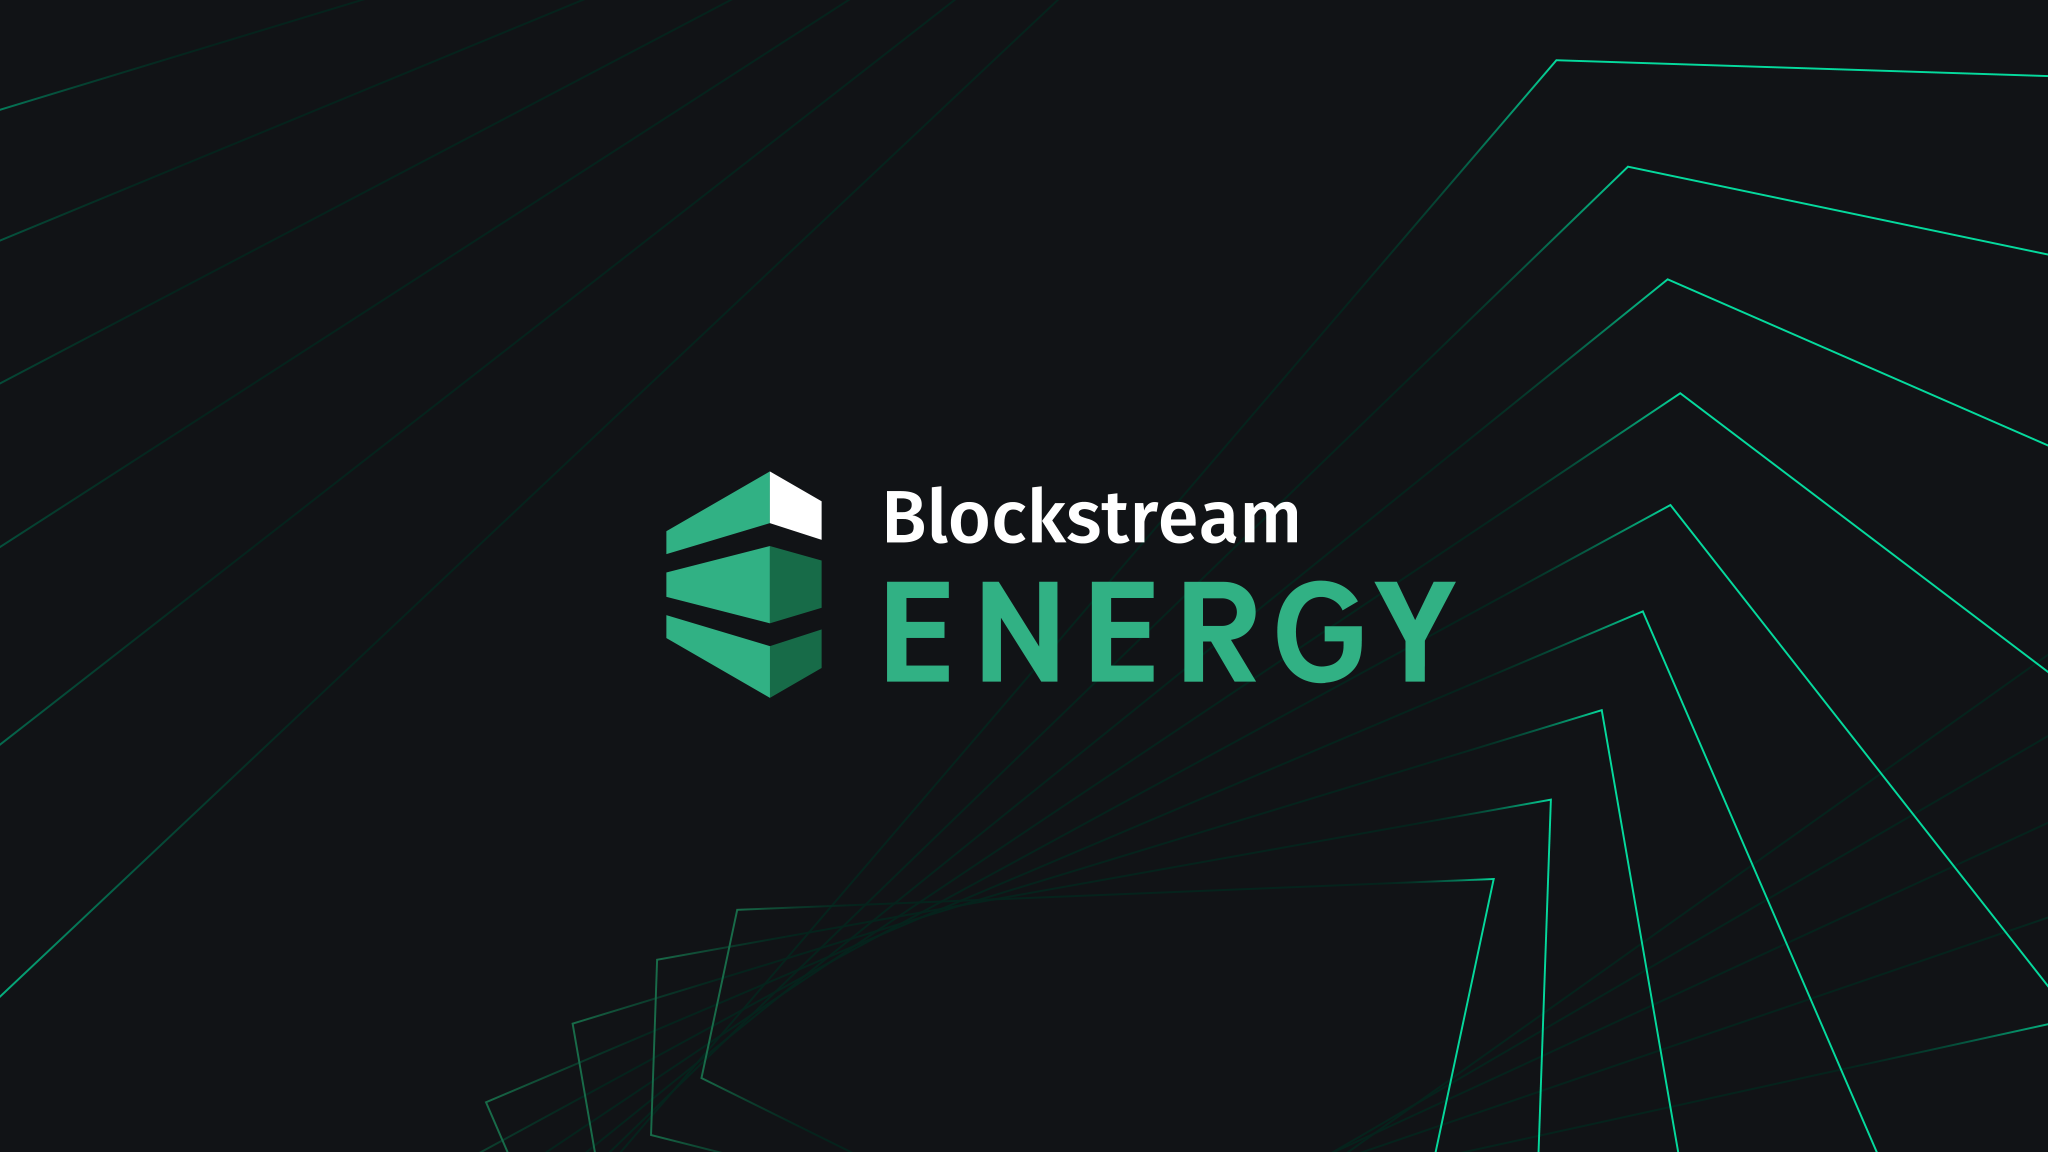 Introducing Blockstream Energy, a New Service Focused on Renewable-Sourced Bitcoin